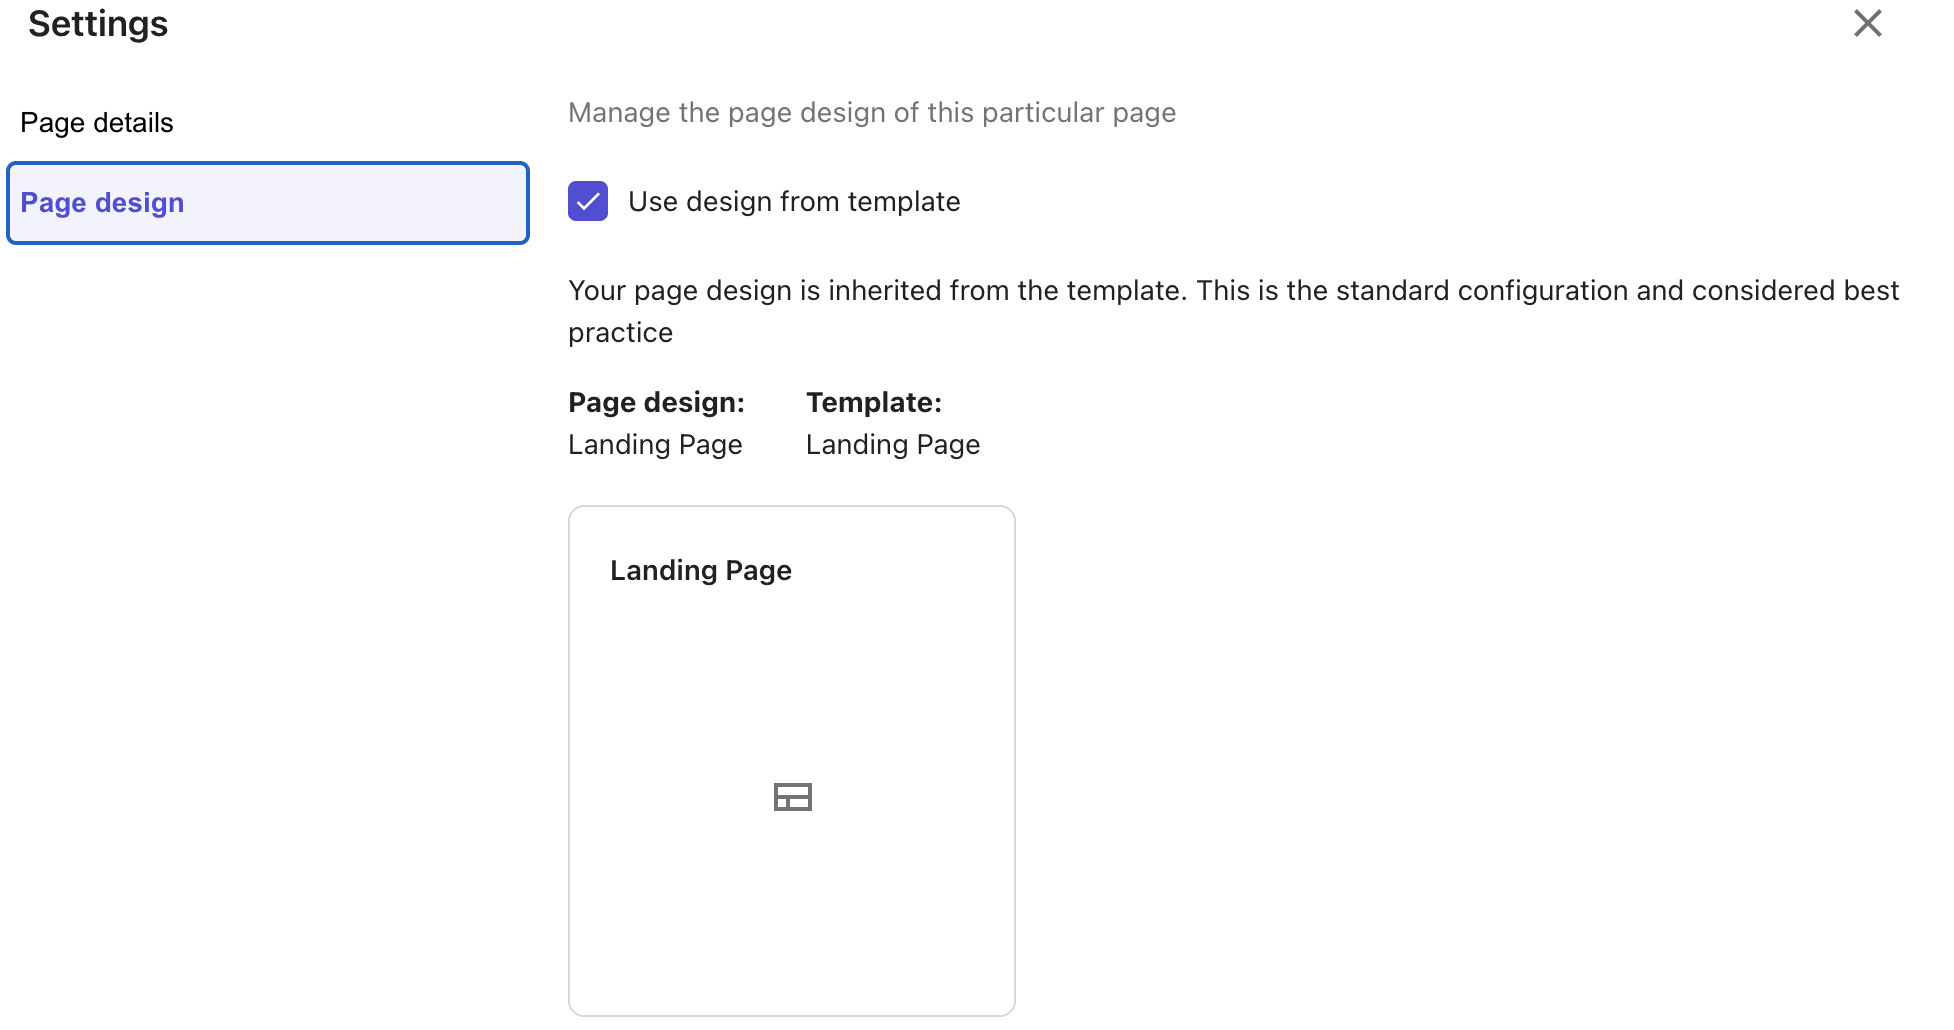 Settings window showing page design options with a "Use design from template" checkbox.